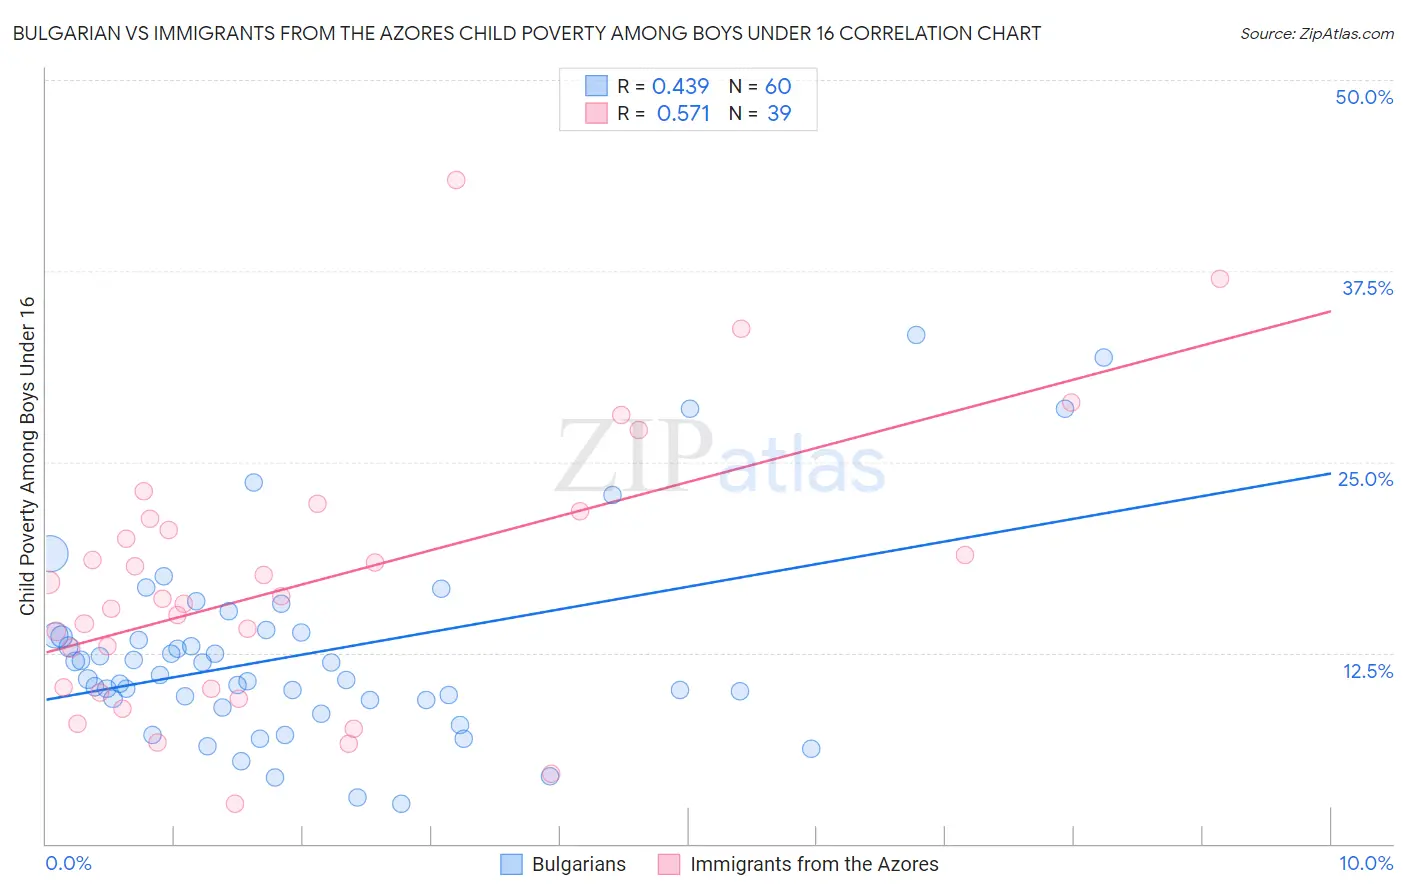 Bulgarian vs Immigrants from the Azores Child Poverty Among Boys Under 16